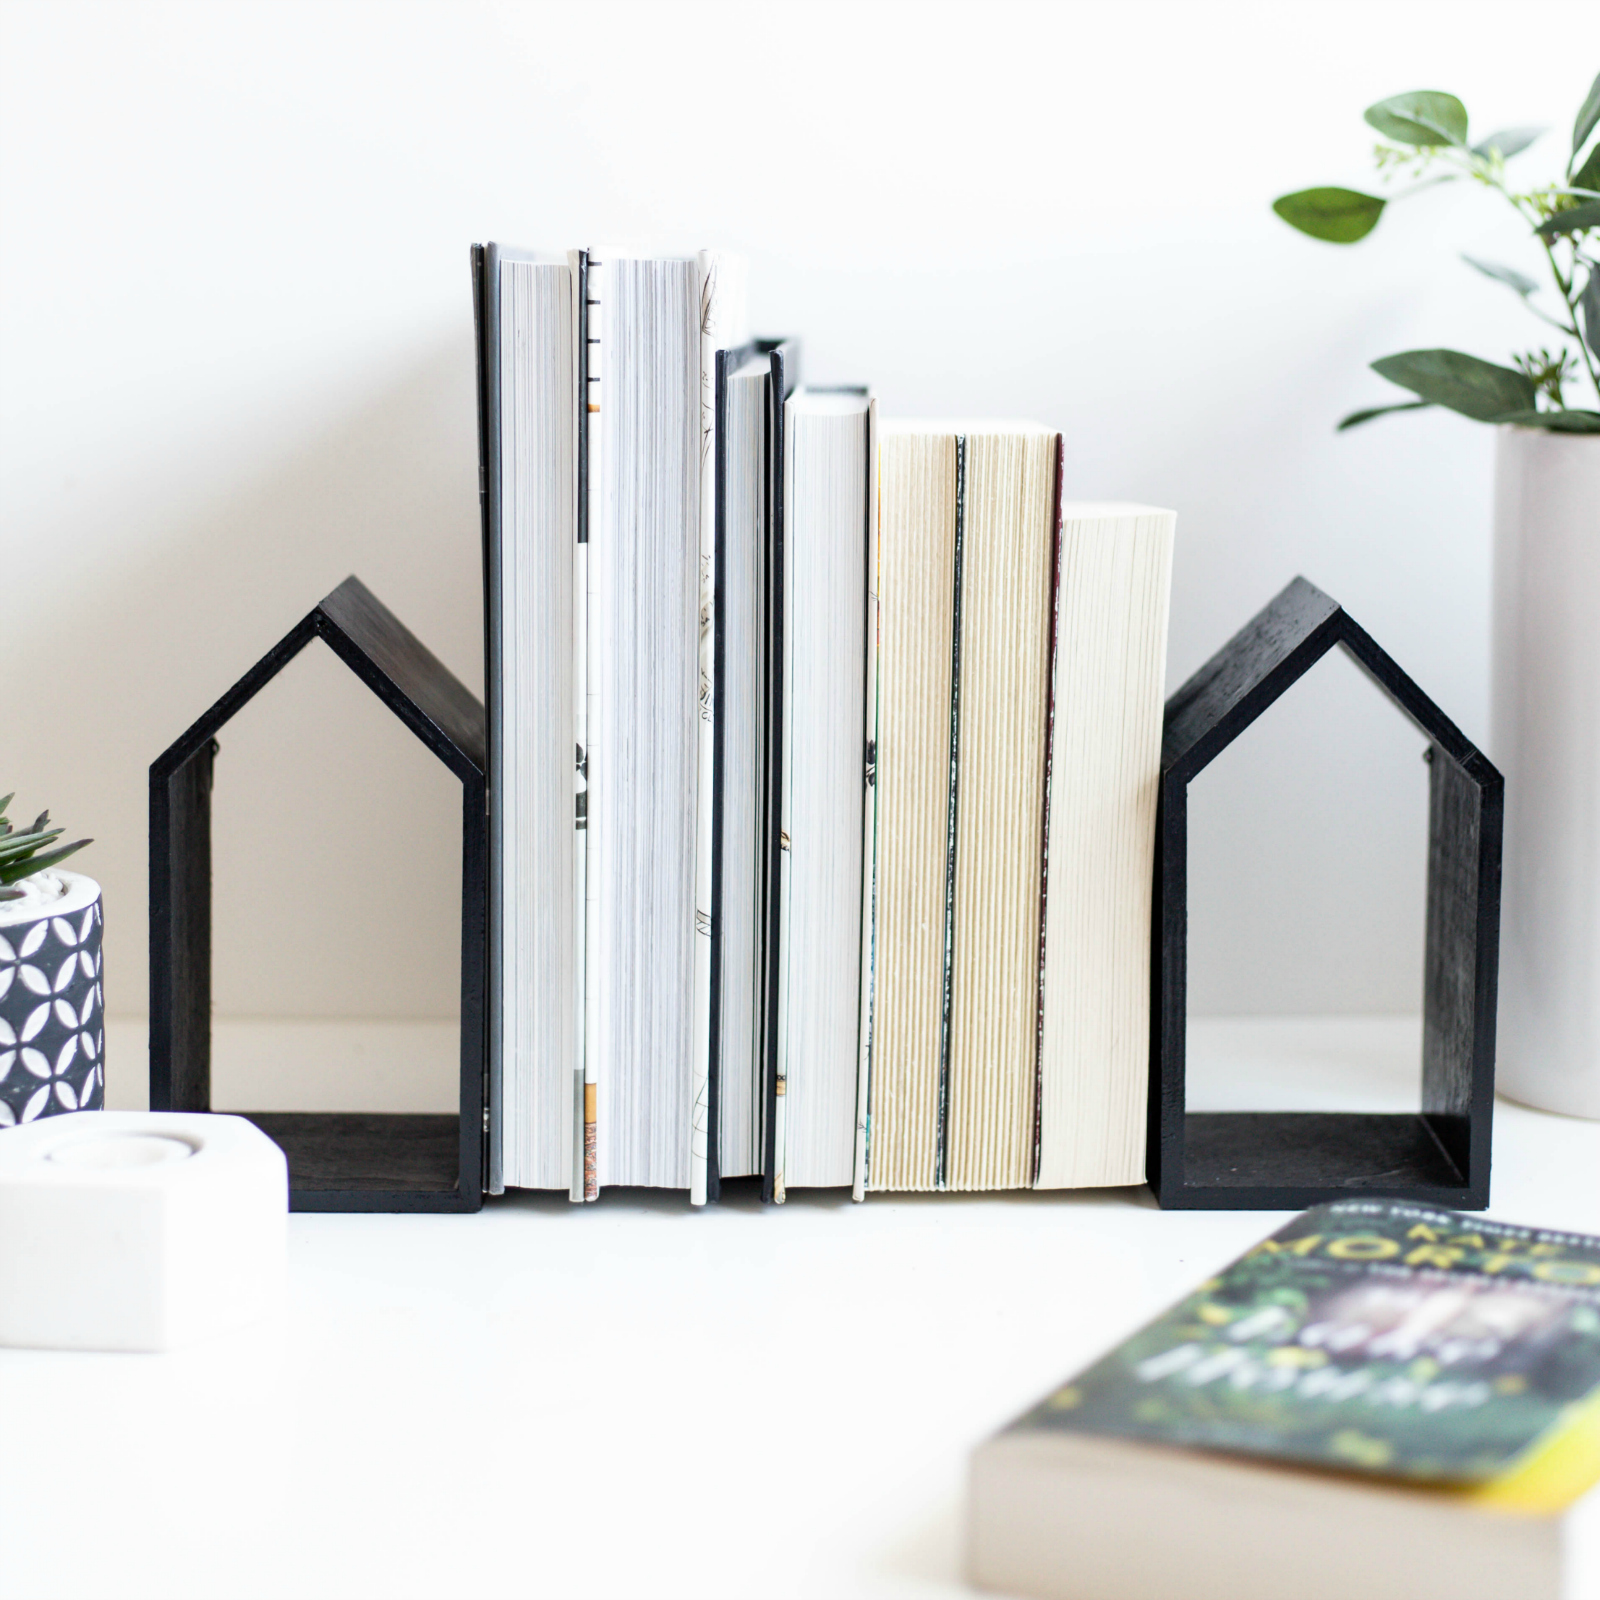 Modern house bookends